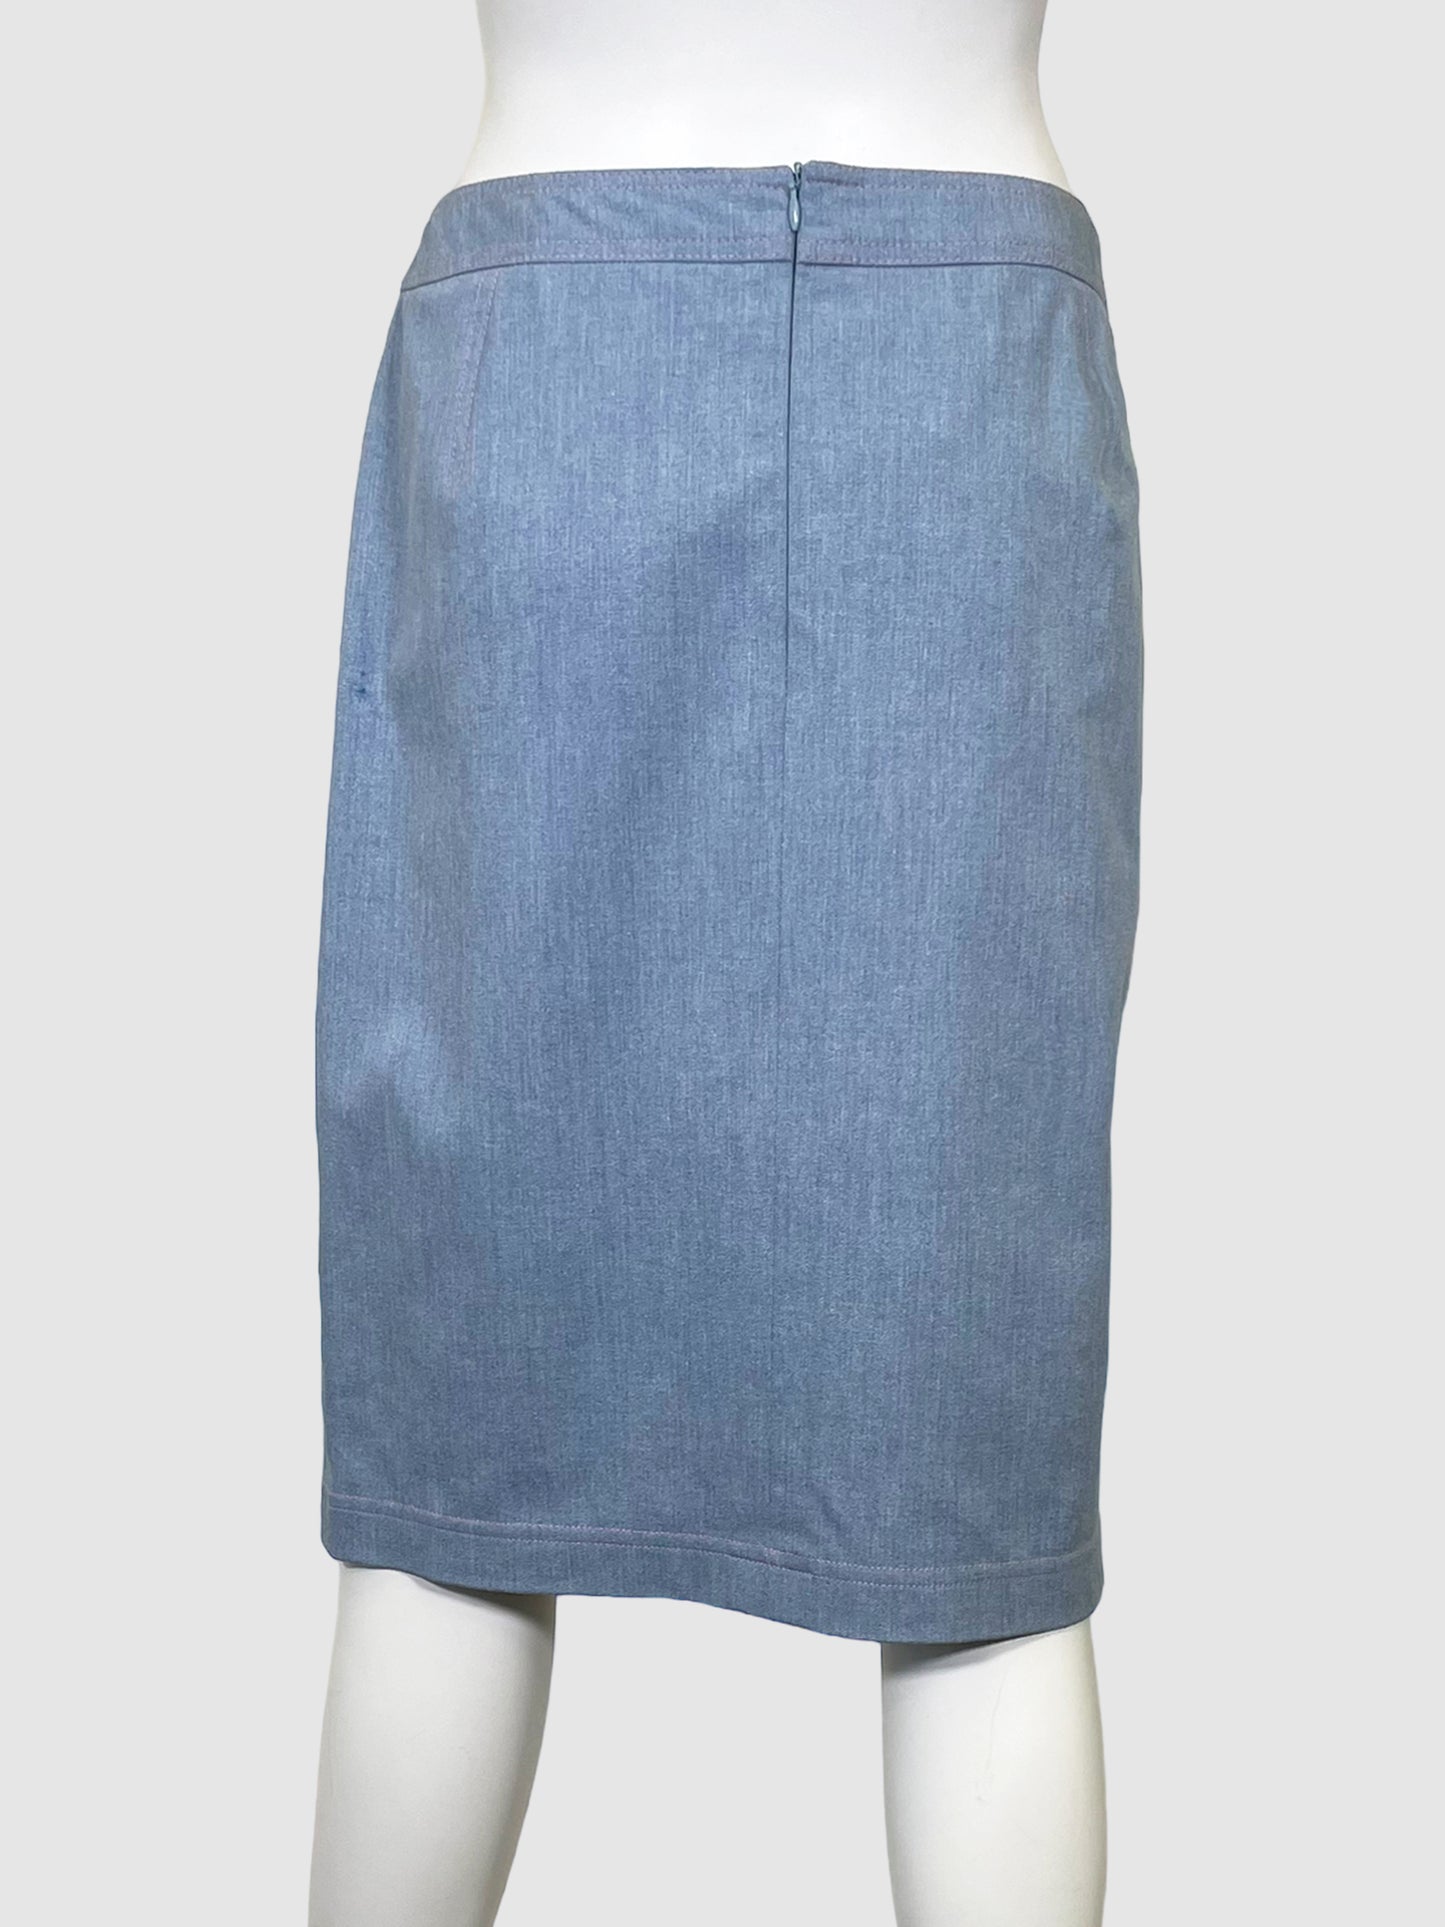 Denim Skirt with Contrast Stitching - Size 42